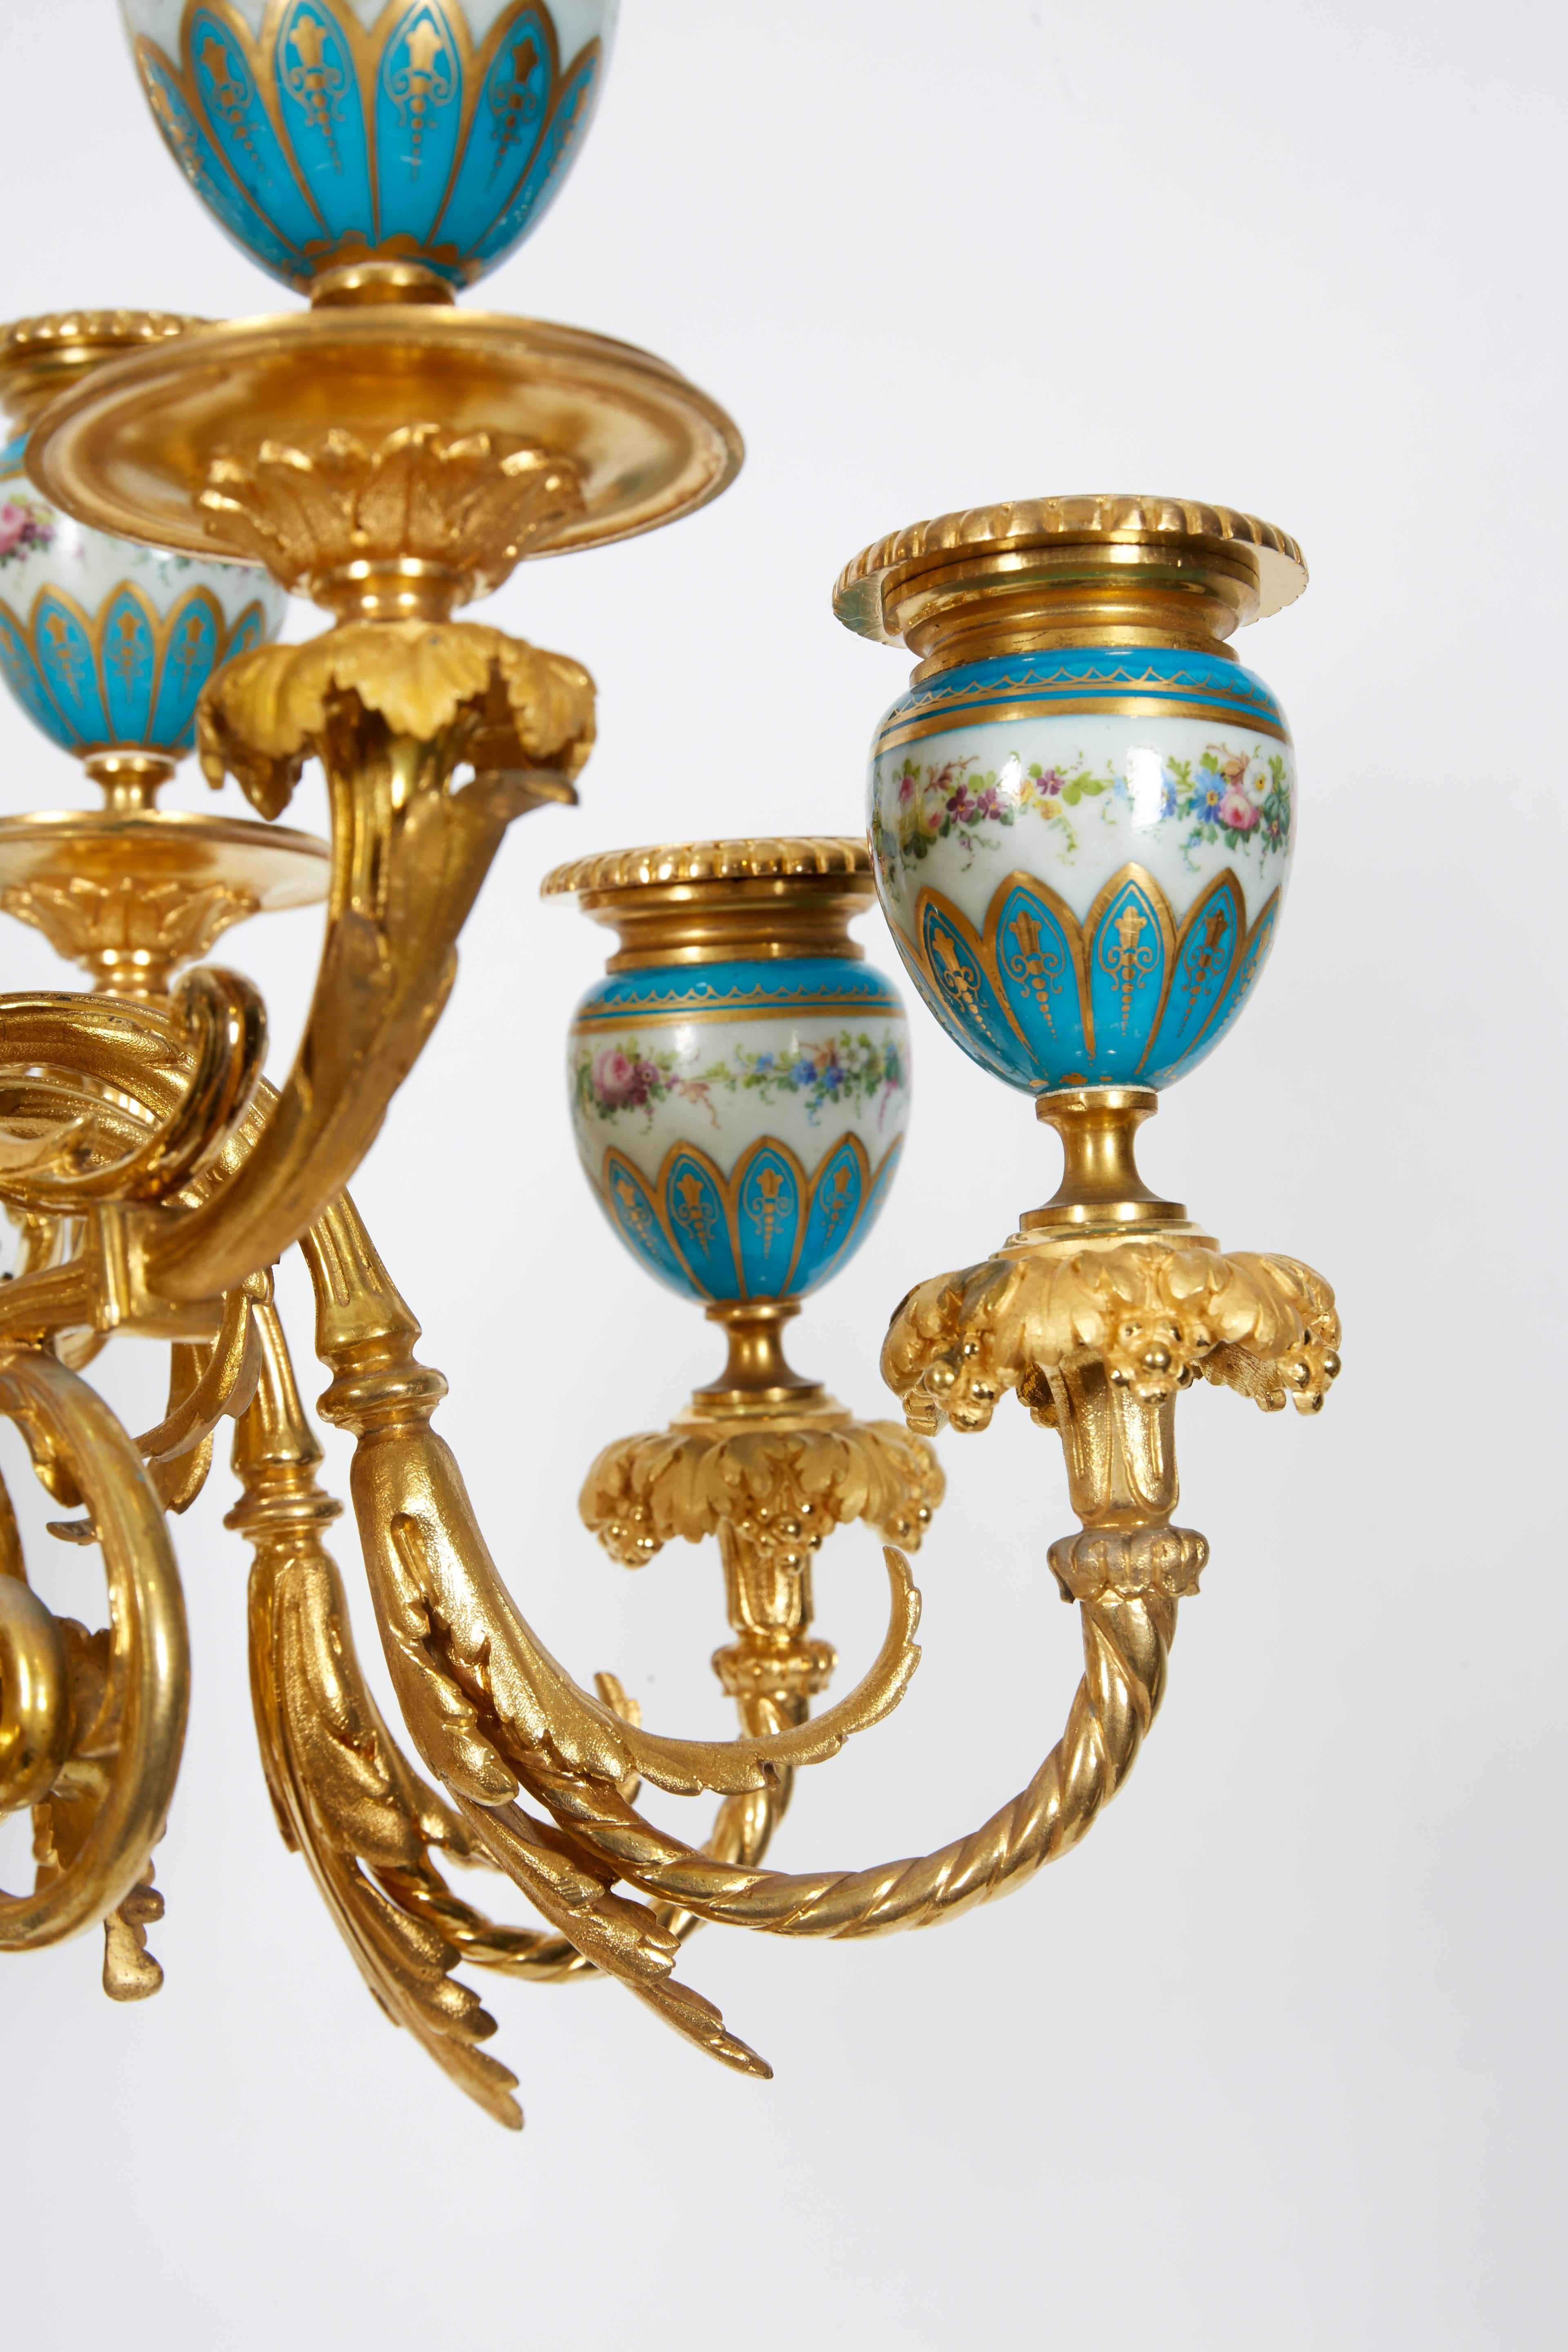 Exquisite Pair of French Ormolu and Turquoise Sevres Porcelain Candelabra 6